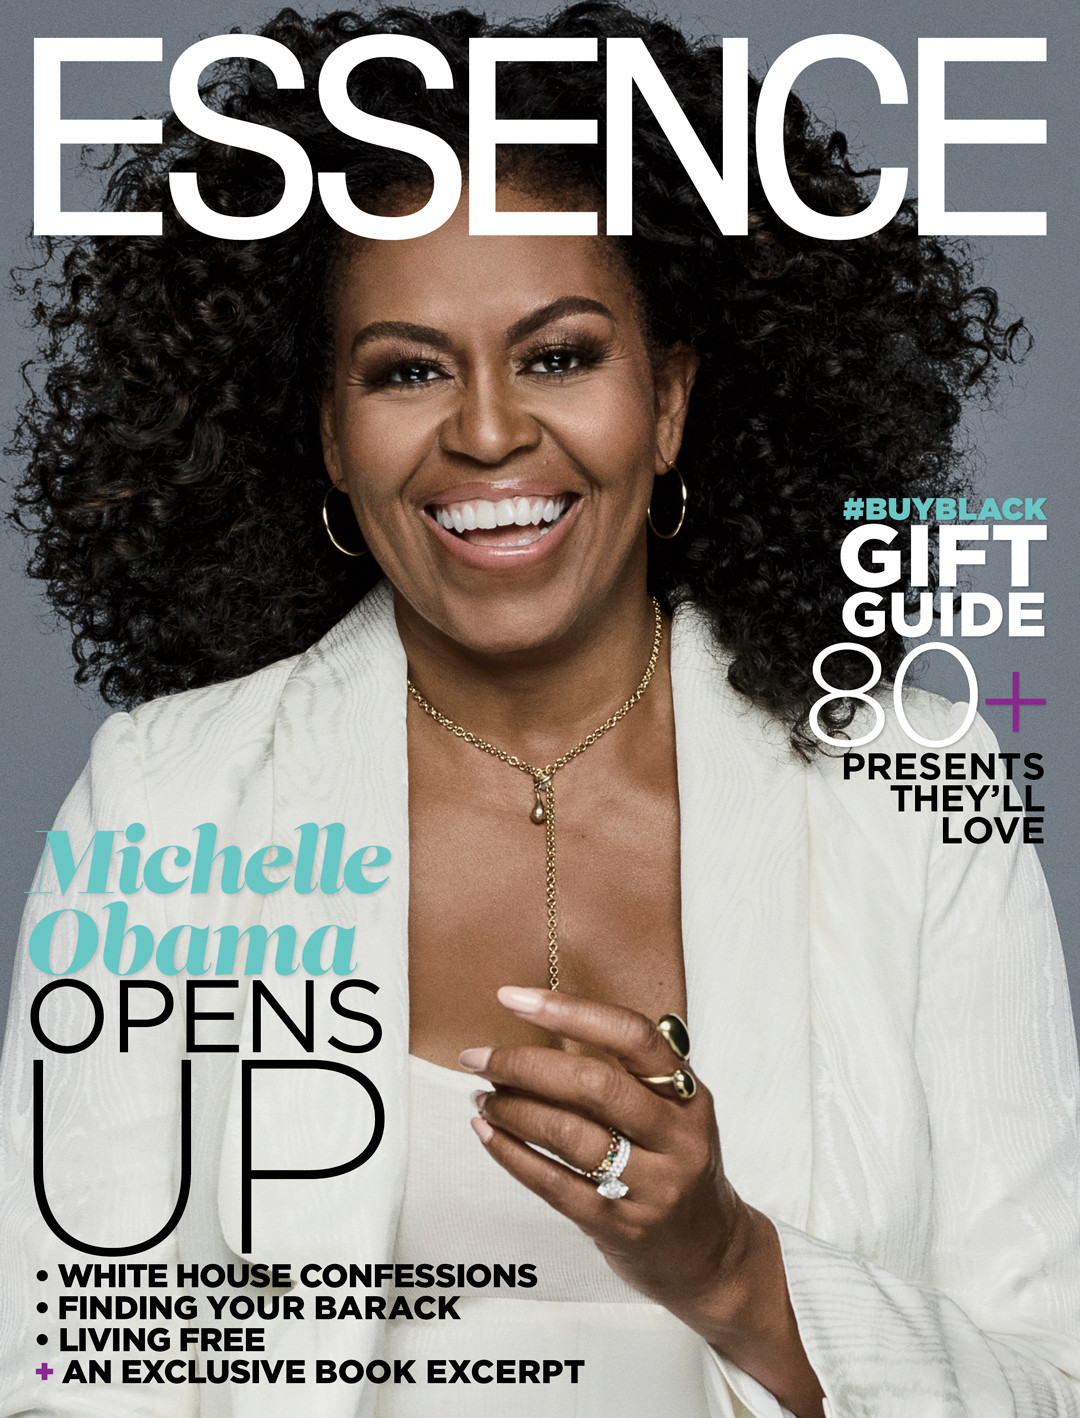 Michelle Obama Stuns With Curly Hair and Talks Getting Real With Women | E! News Australia1080 x 1418